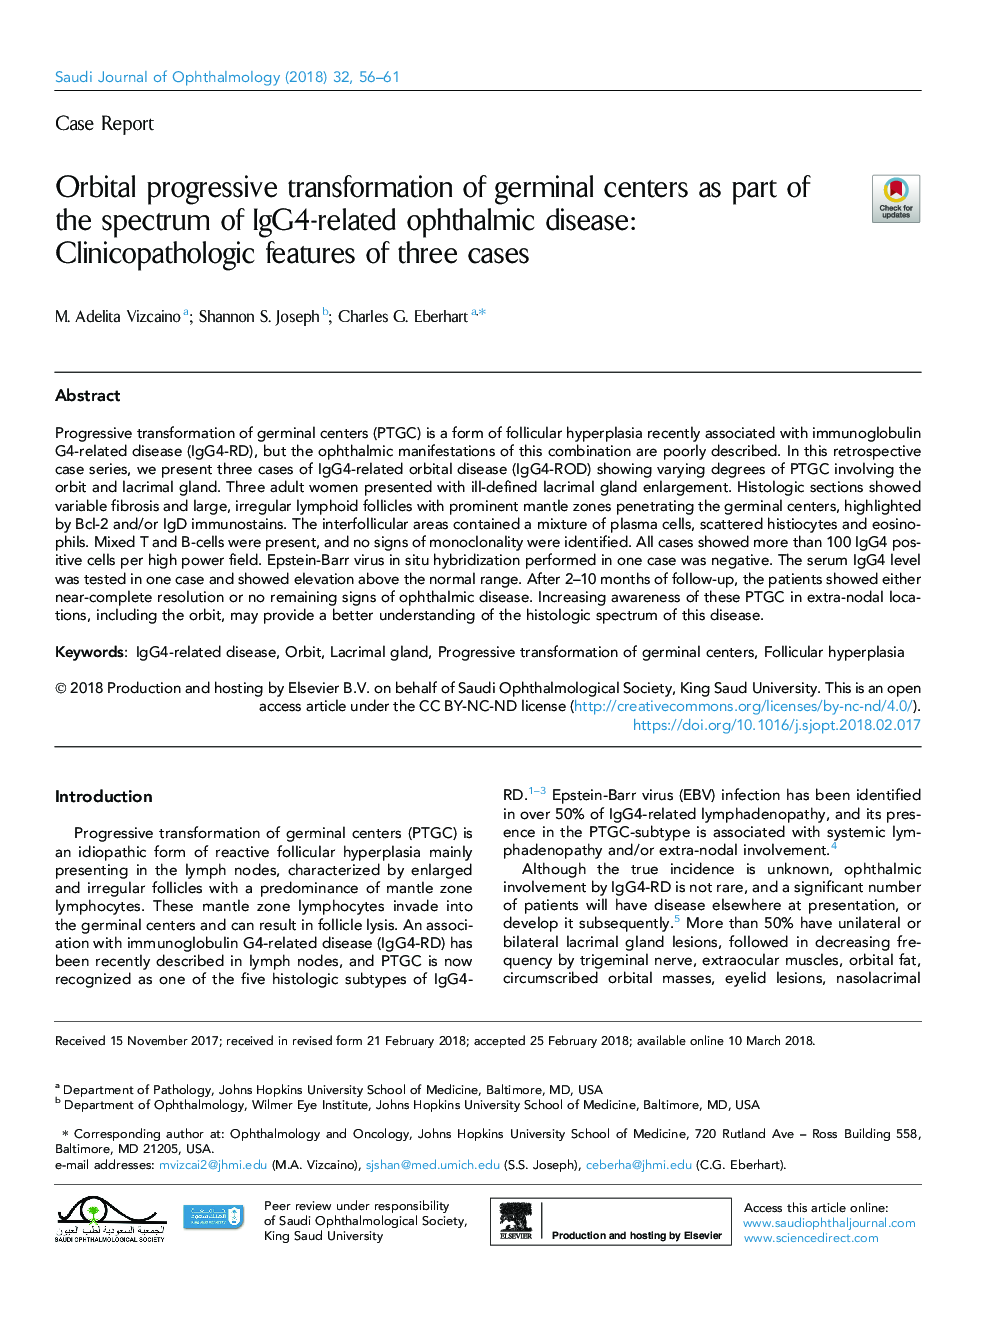 Orbital progressive transformation of germinal centers as part of the spectrum of IgG4-related ophthalmic disease: Clinicopathologic features of three cases